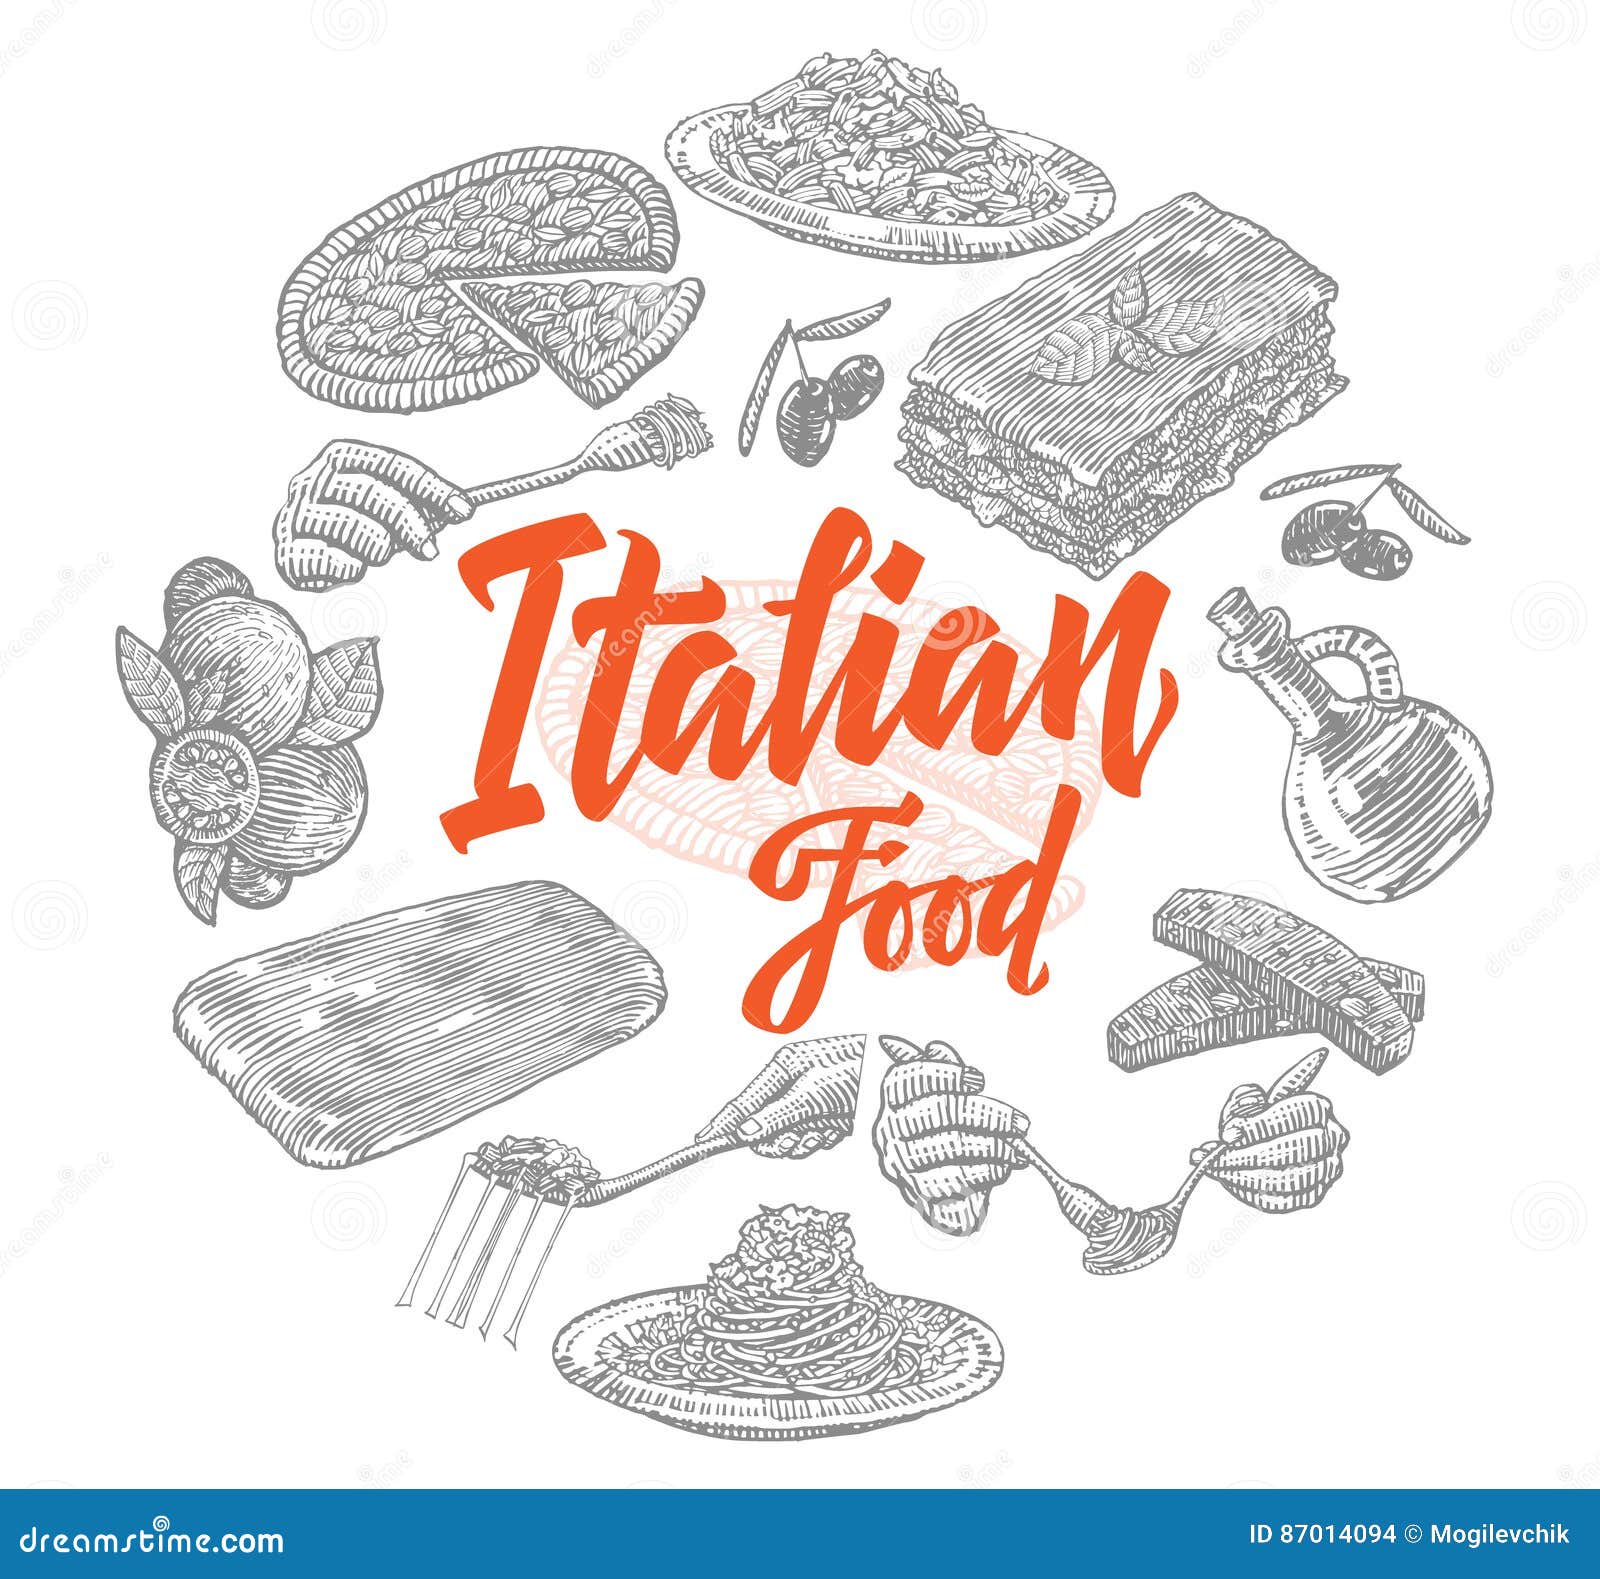 Sketch Italian Food Elements Collection Stock Vector - Illustration of ...